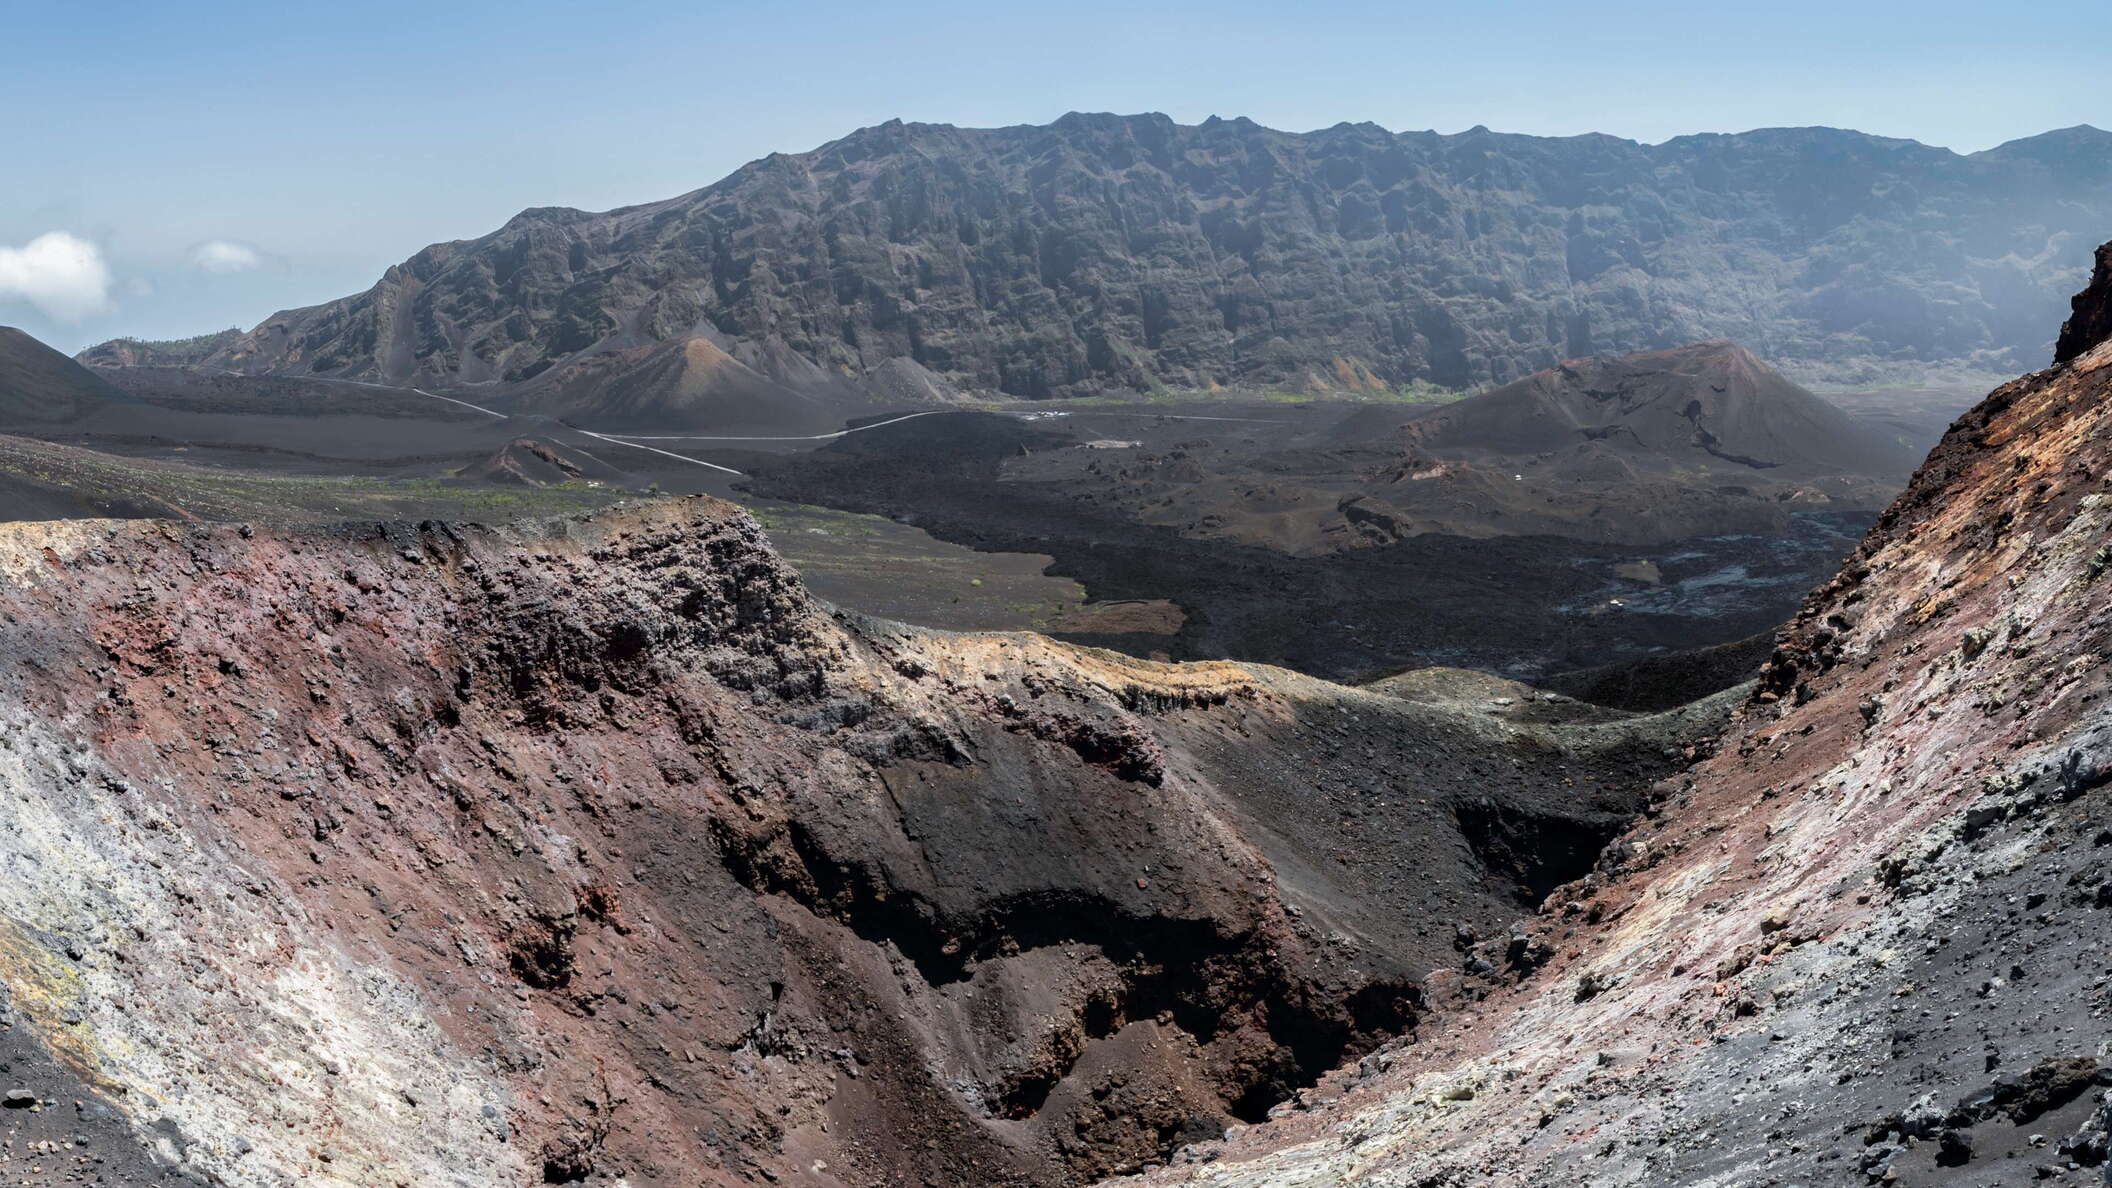 Fogo | Crater and lava flows of 2014/15